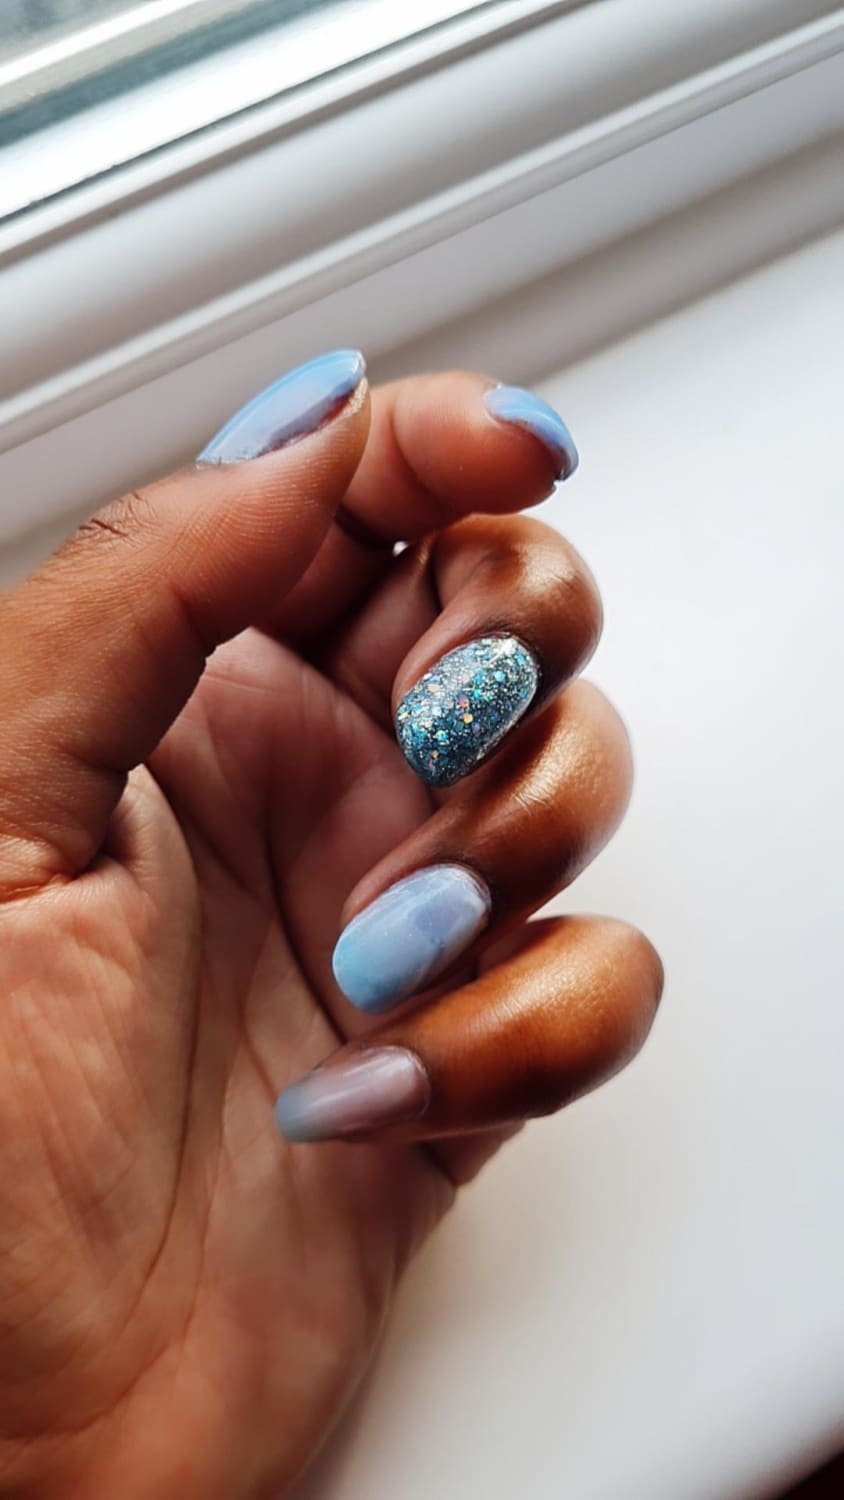 Laquerista in training! Pale blue set for Easter